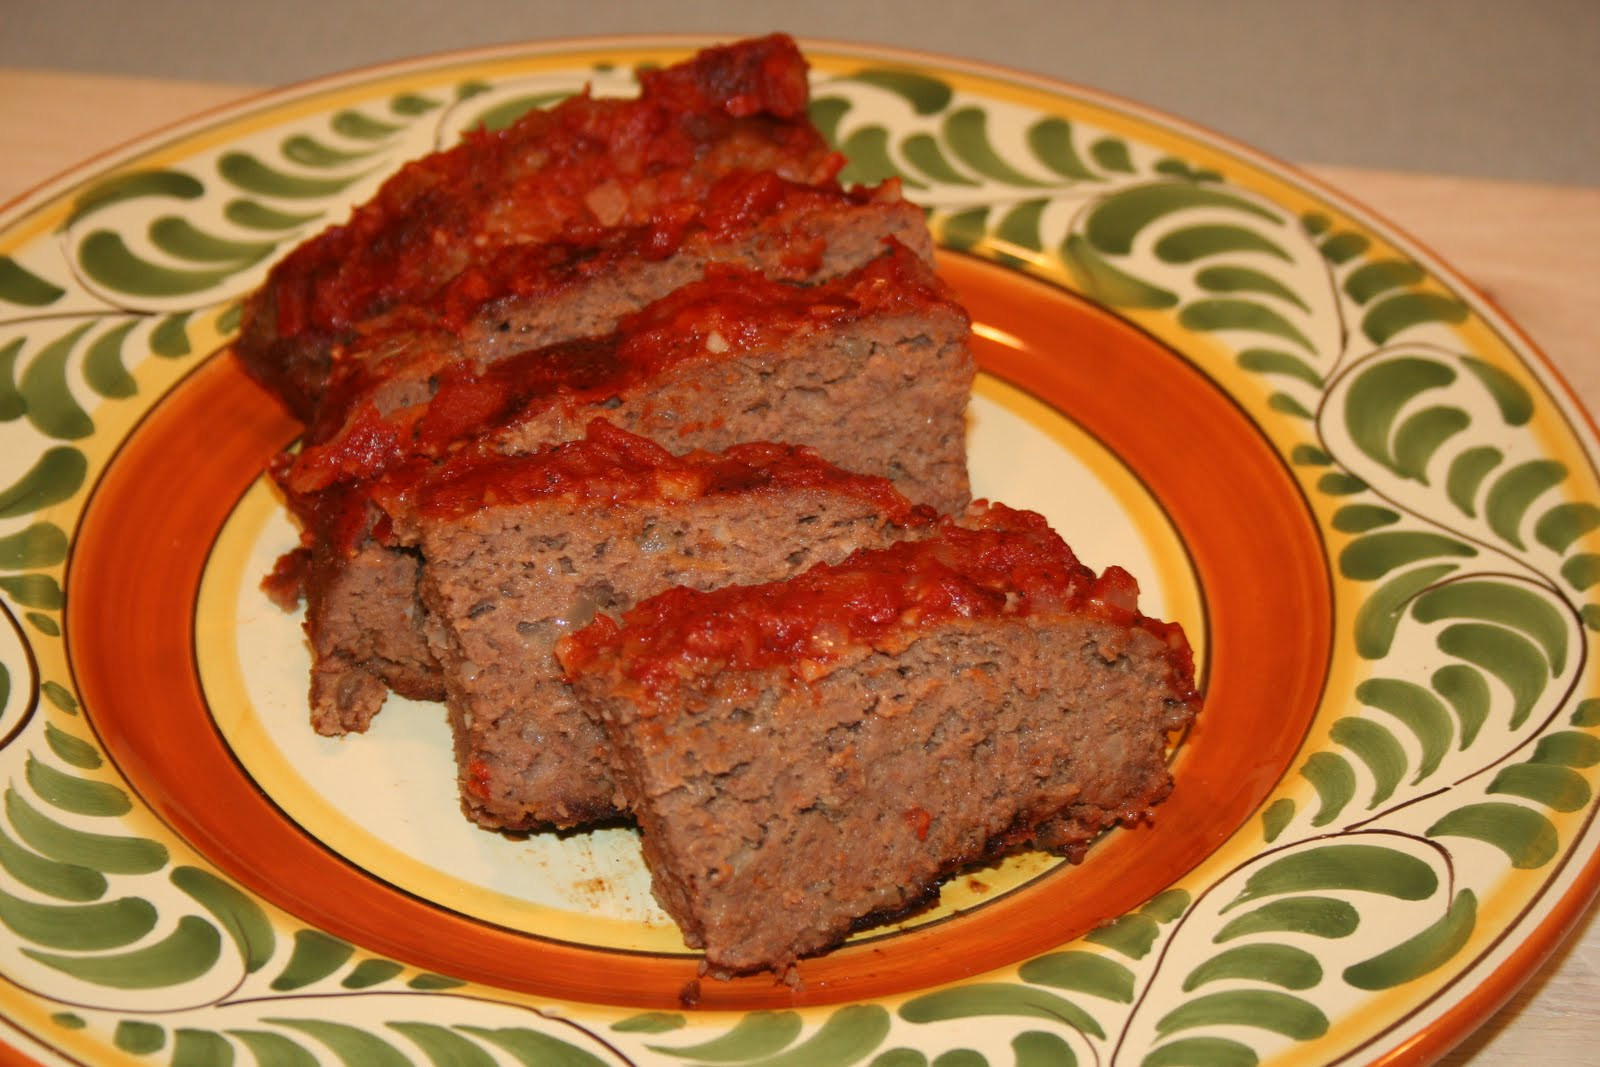 Meatloaf In Microwave
 COOK WITH SUSAN Toaster Oven Meatloaf Old Fashioned